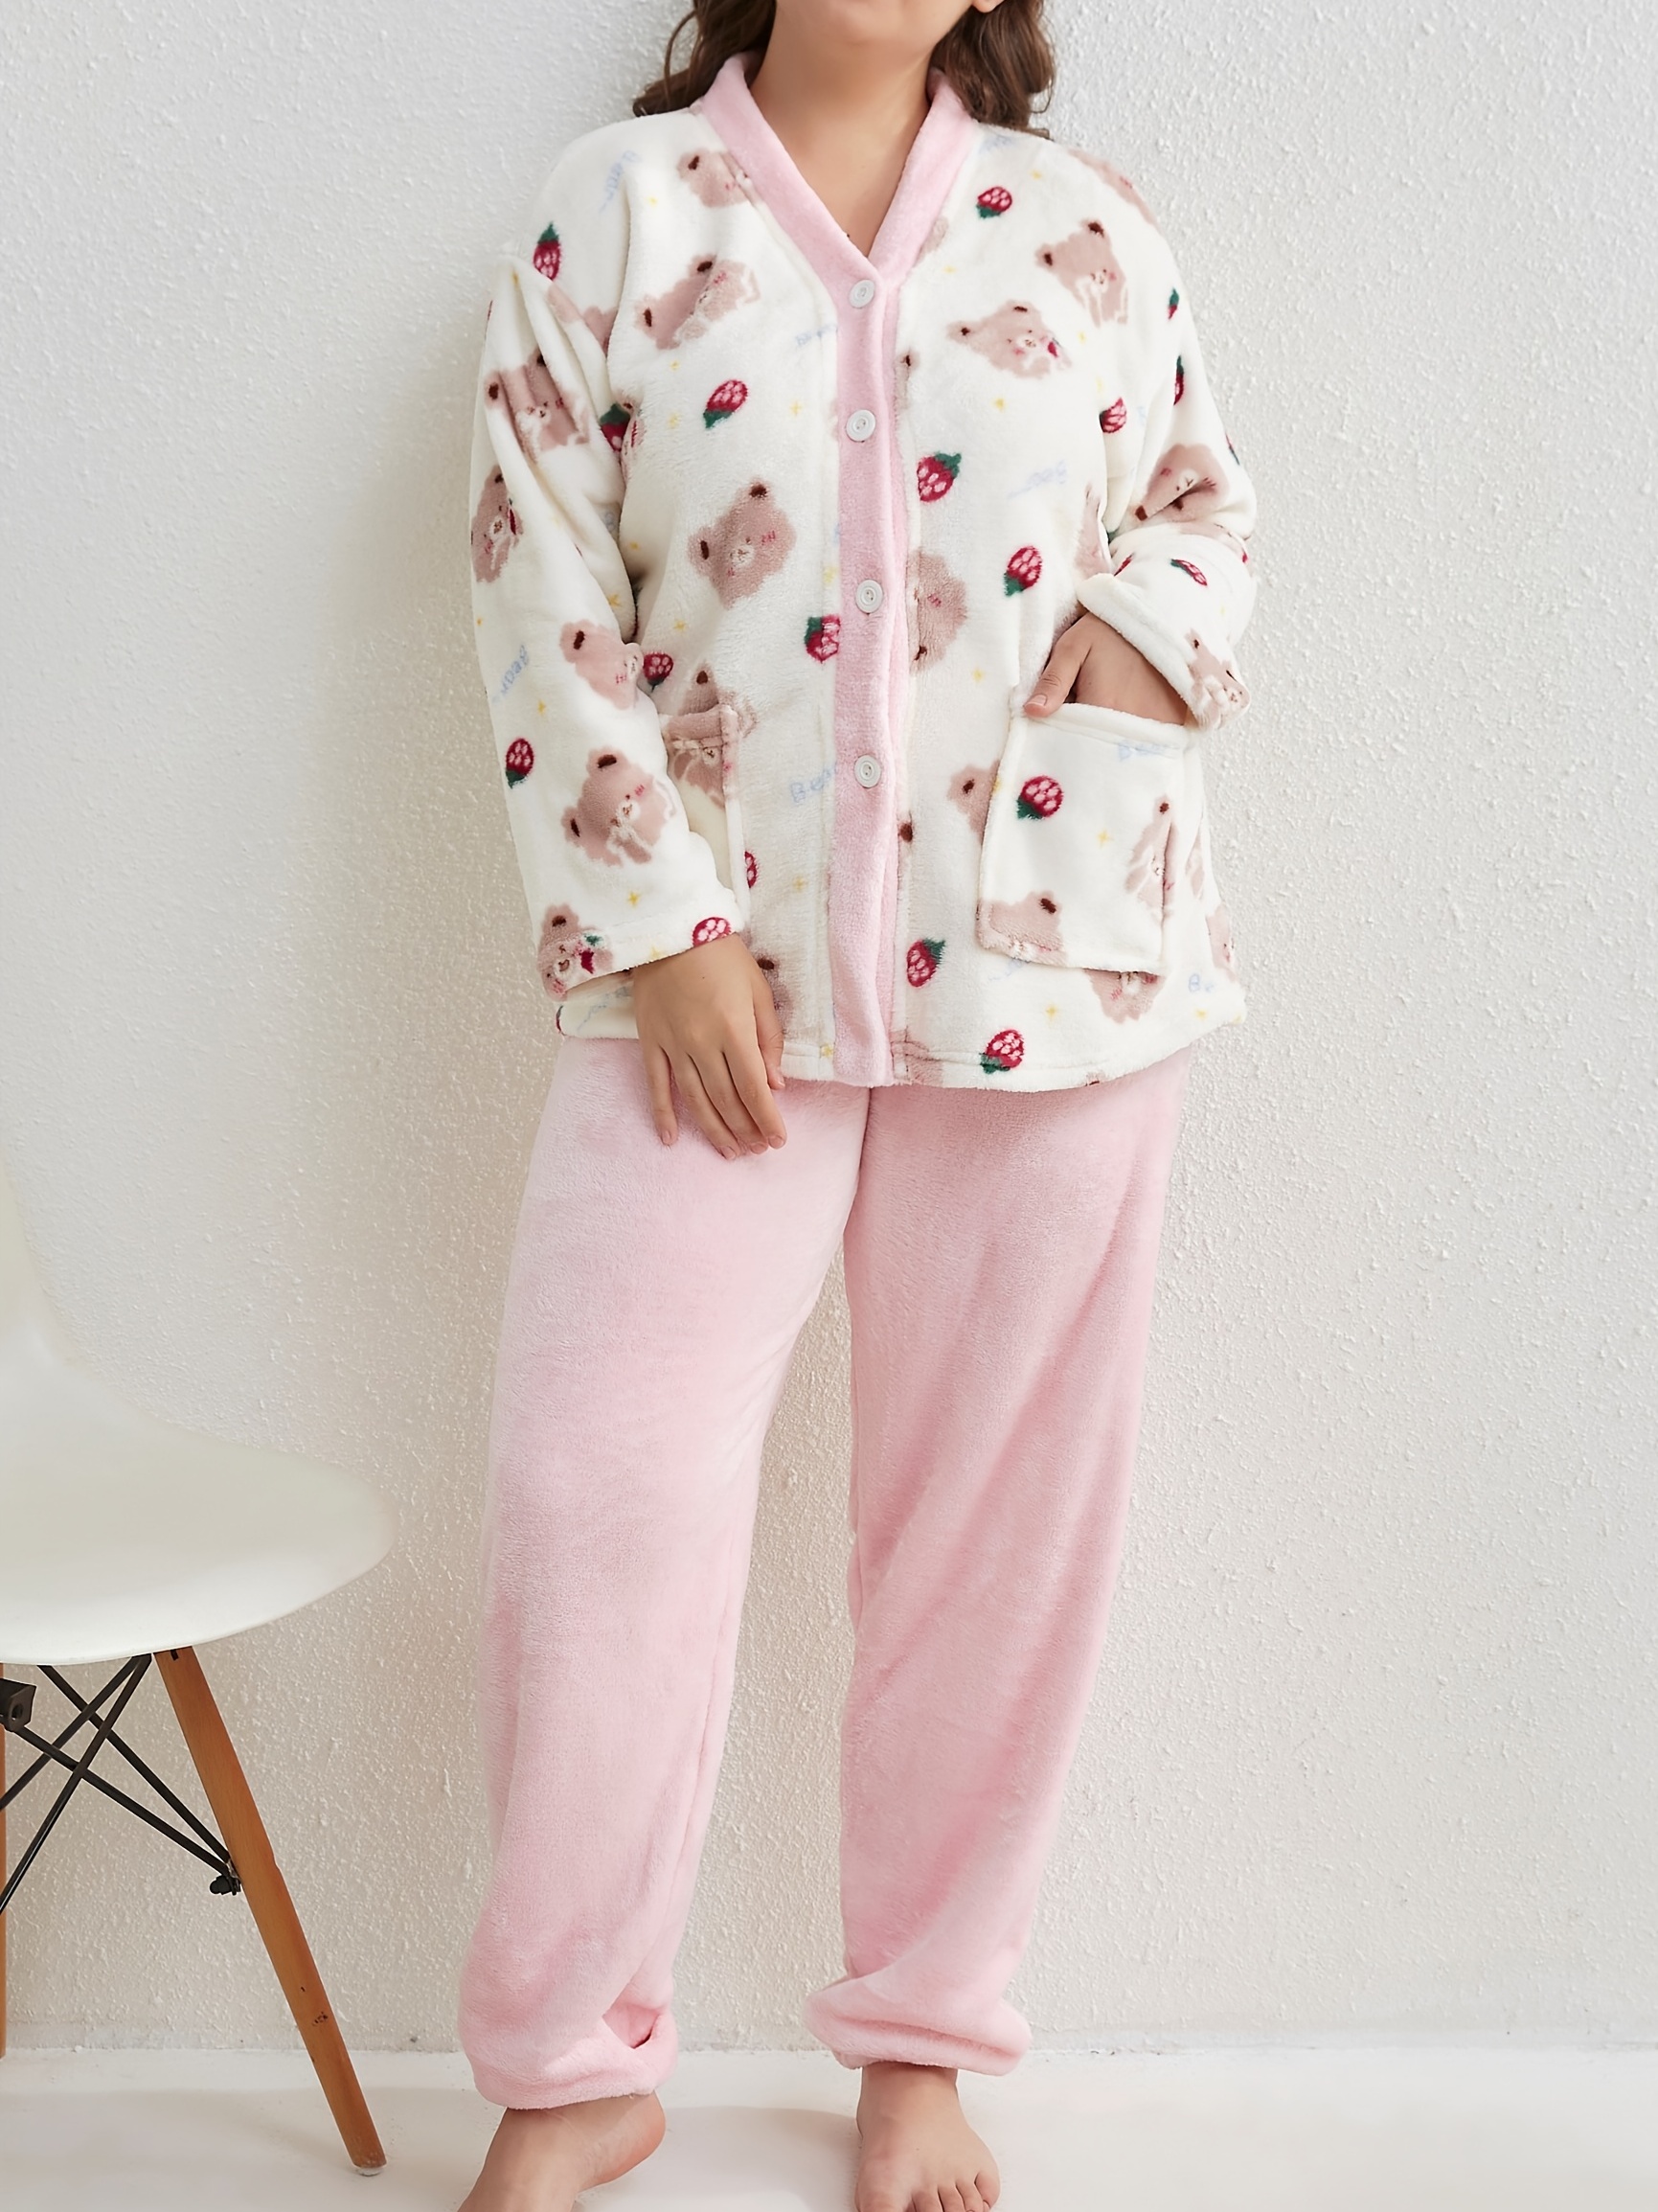 Plus Size Cute Pajama Set, Women's Plus Strawberry & Cartoon Bear Print  Long Sleeve Button Up Flannel Top With Pockets & Pants Home Wear Two Piece  Set